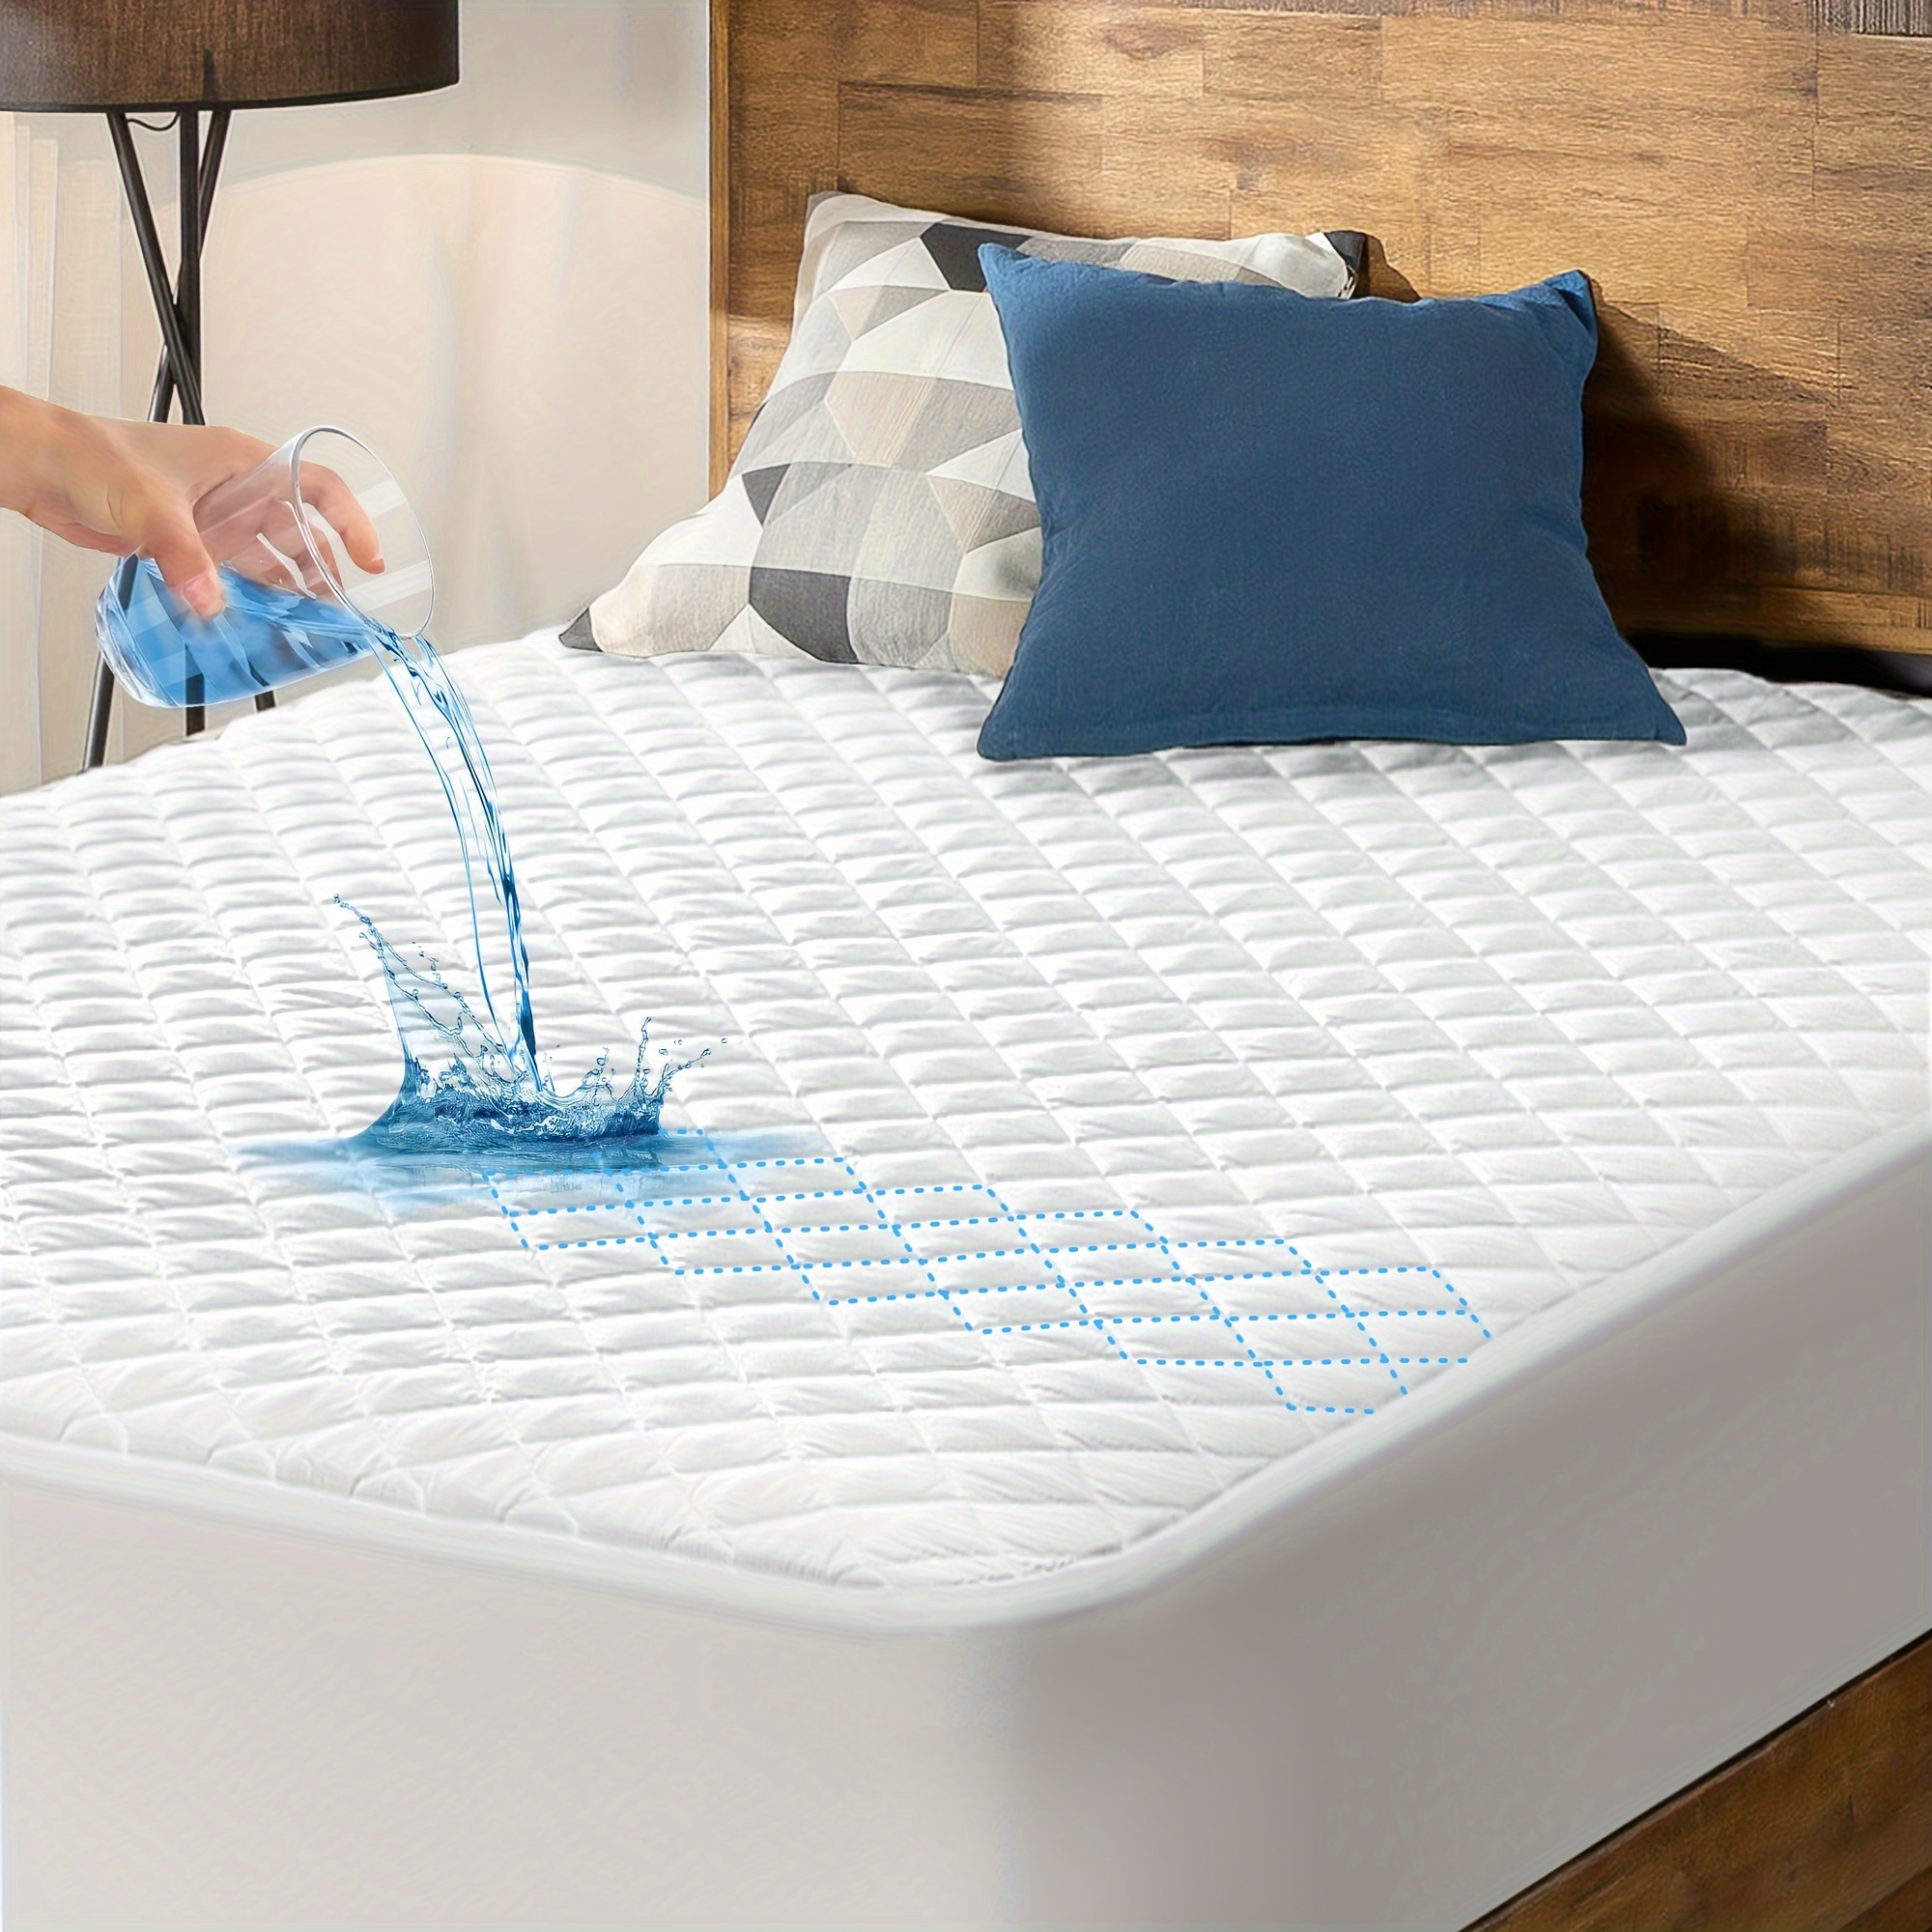 

Waterproof Mattress Pad Protector, Breathable Quilted Mattress Cover Noiseless Thickened, Double-layer Waterproof Fitted Sheet Mattress Topper Upto 21" Deep Pocket Queen